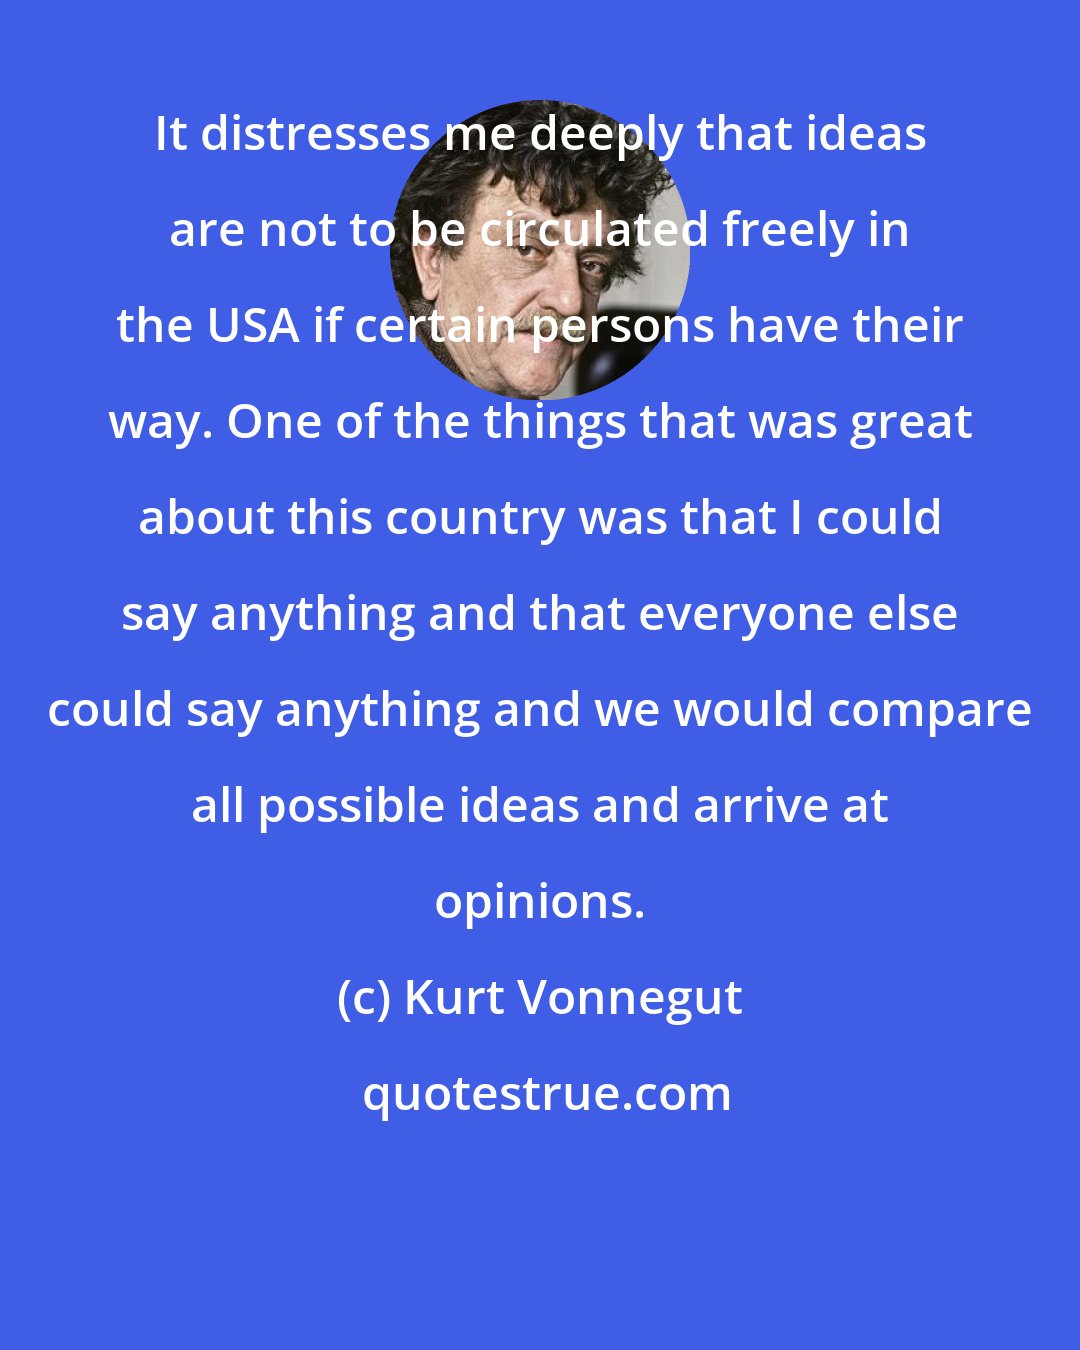 Kurt Vonnegut: It distresses me deeply that ideas are not to be circulated freely in the USA if certain persons have their way. One of the things that was great about this country was that I could say anything and that everyone else could say anything and we would compare all possible ideas and arrive at opinions.